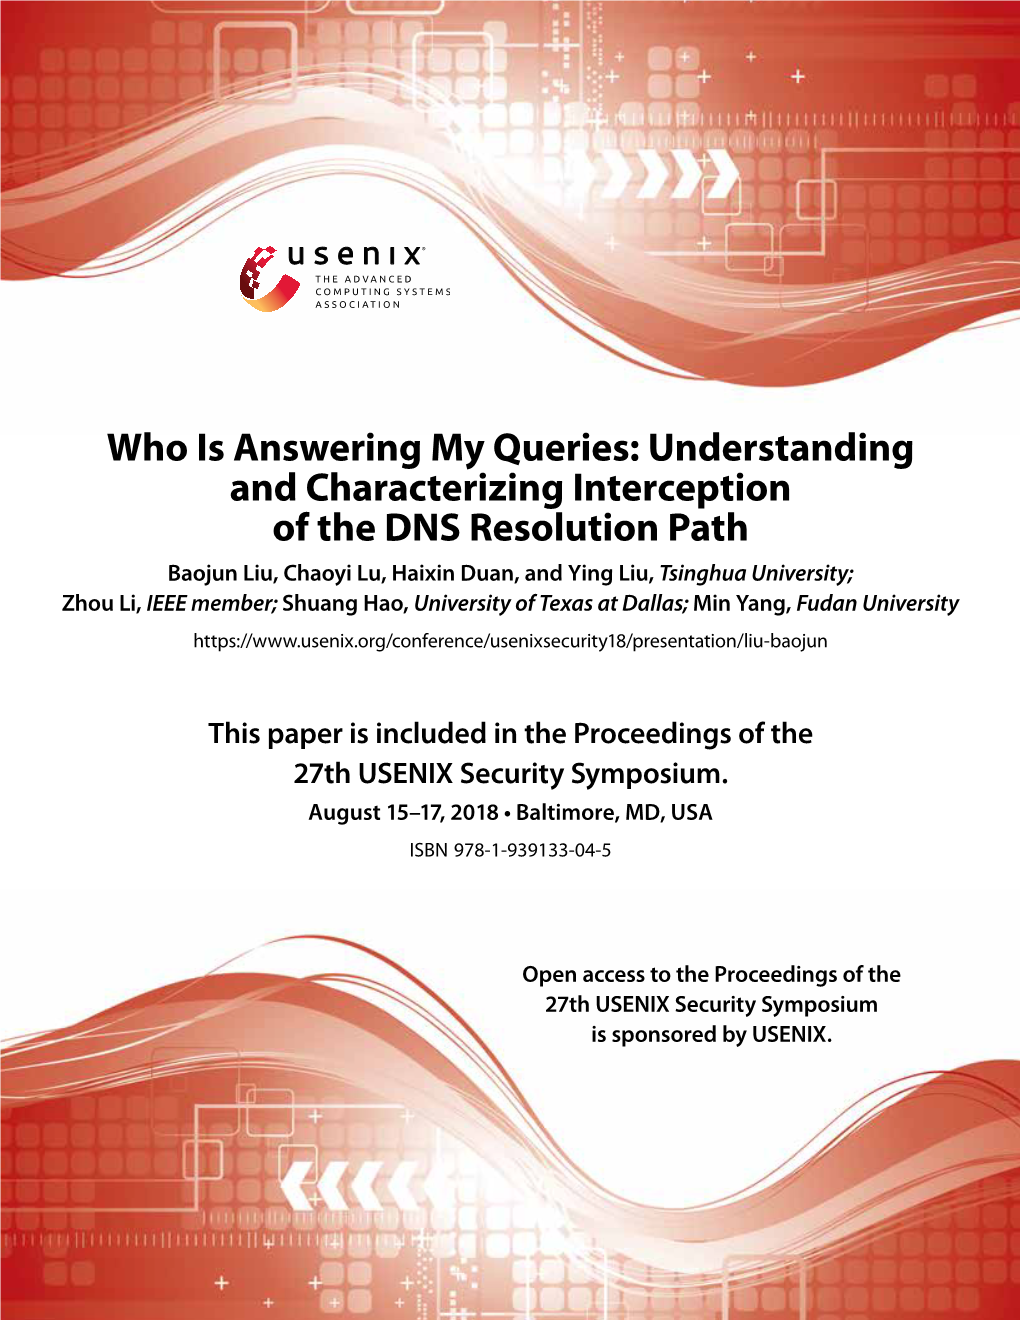 Understanding and Characterizing Interception of the DNS Resolution